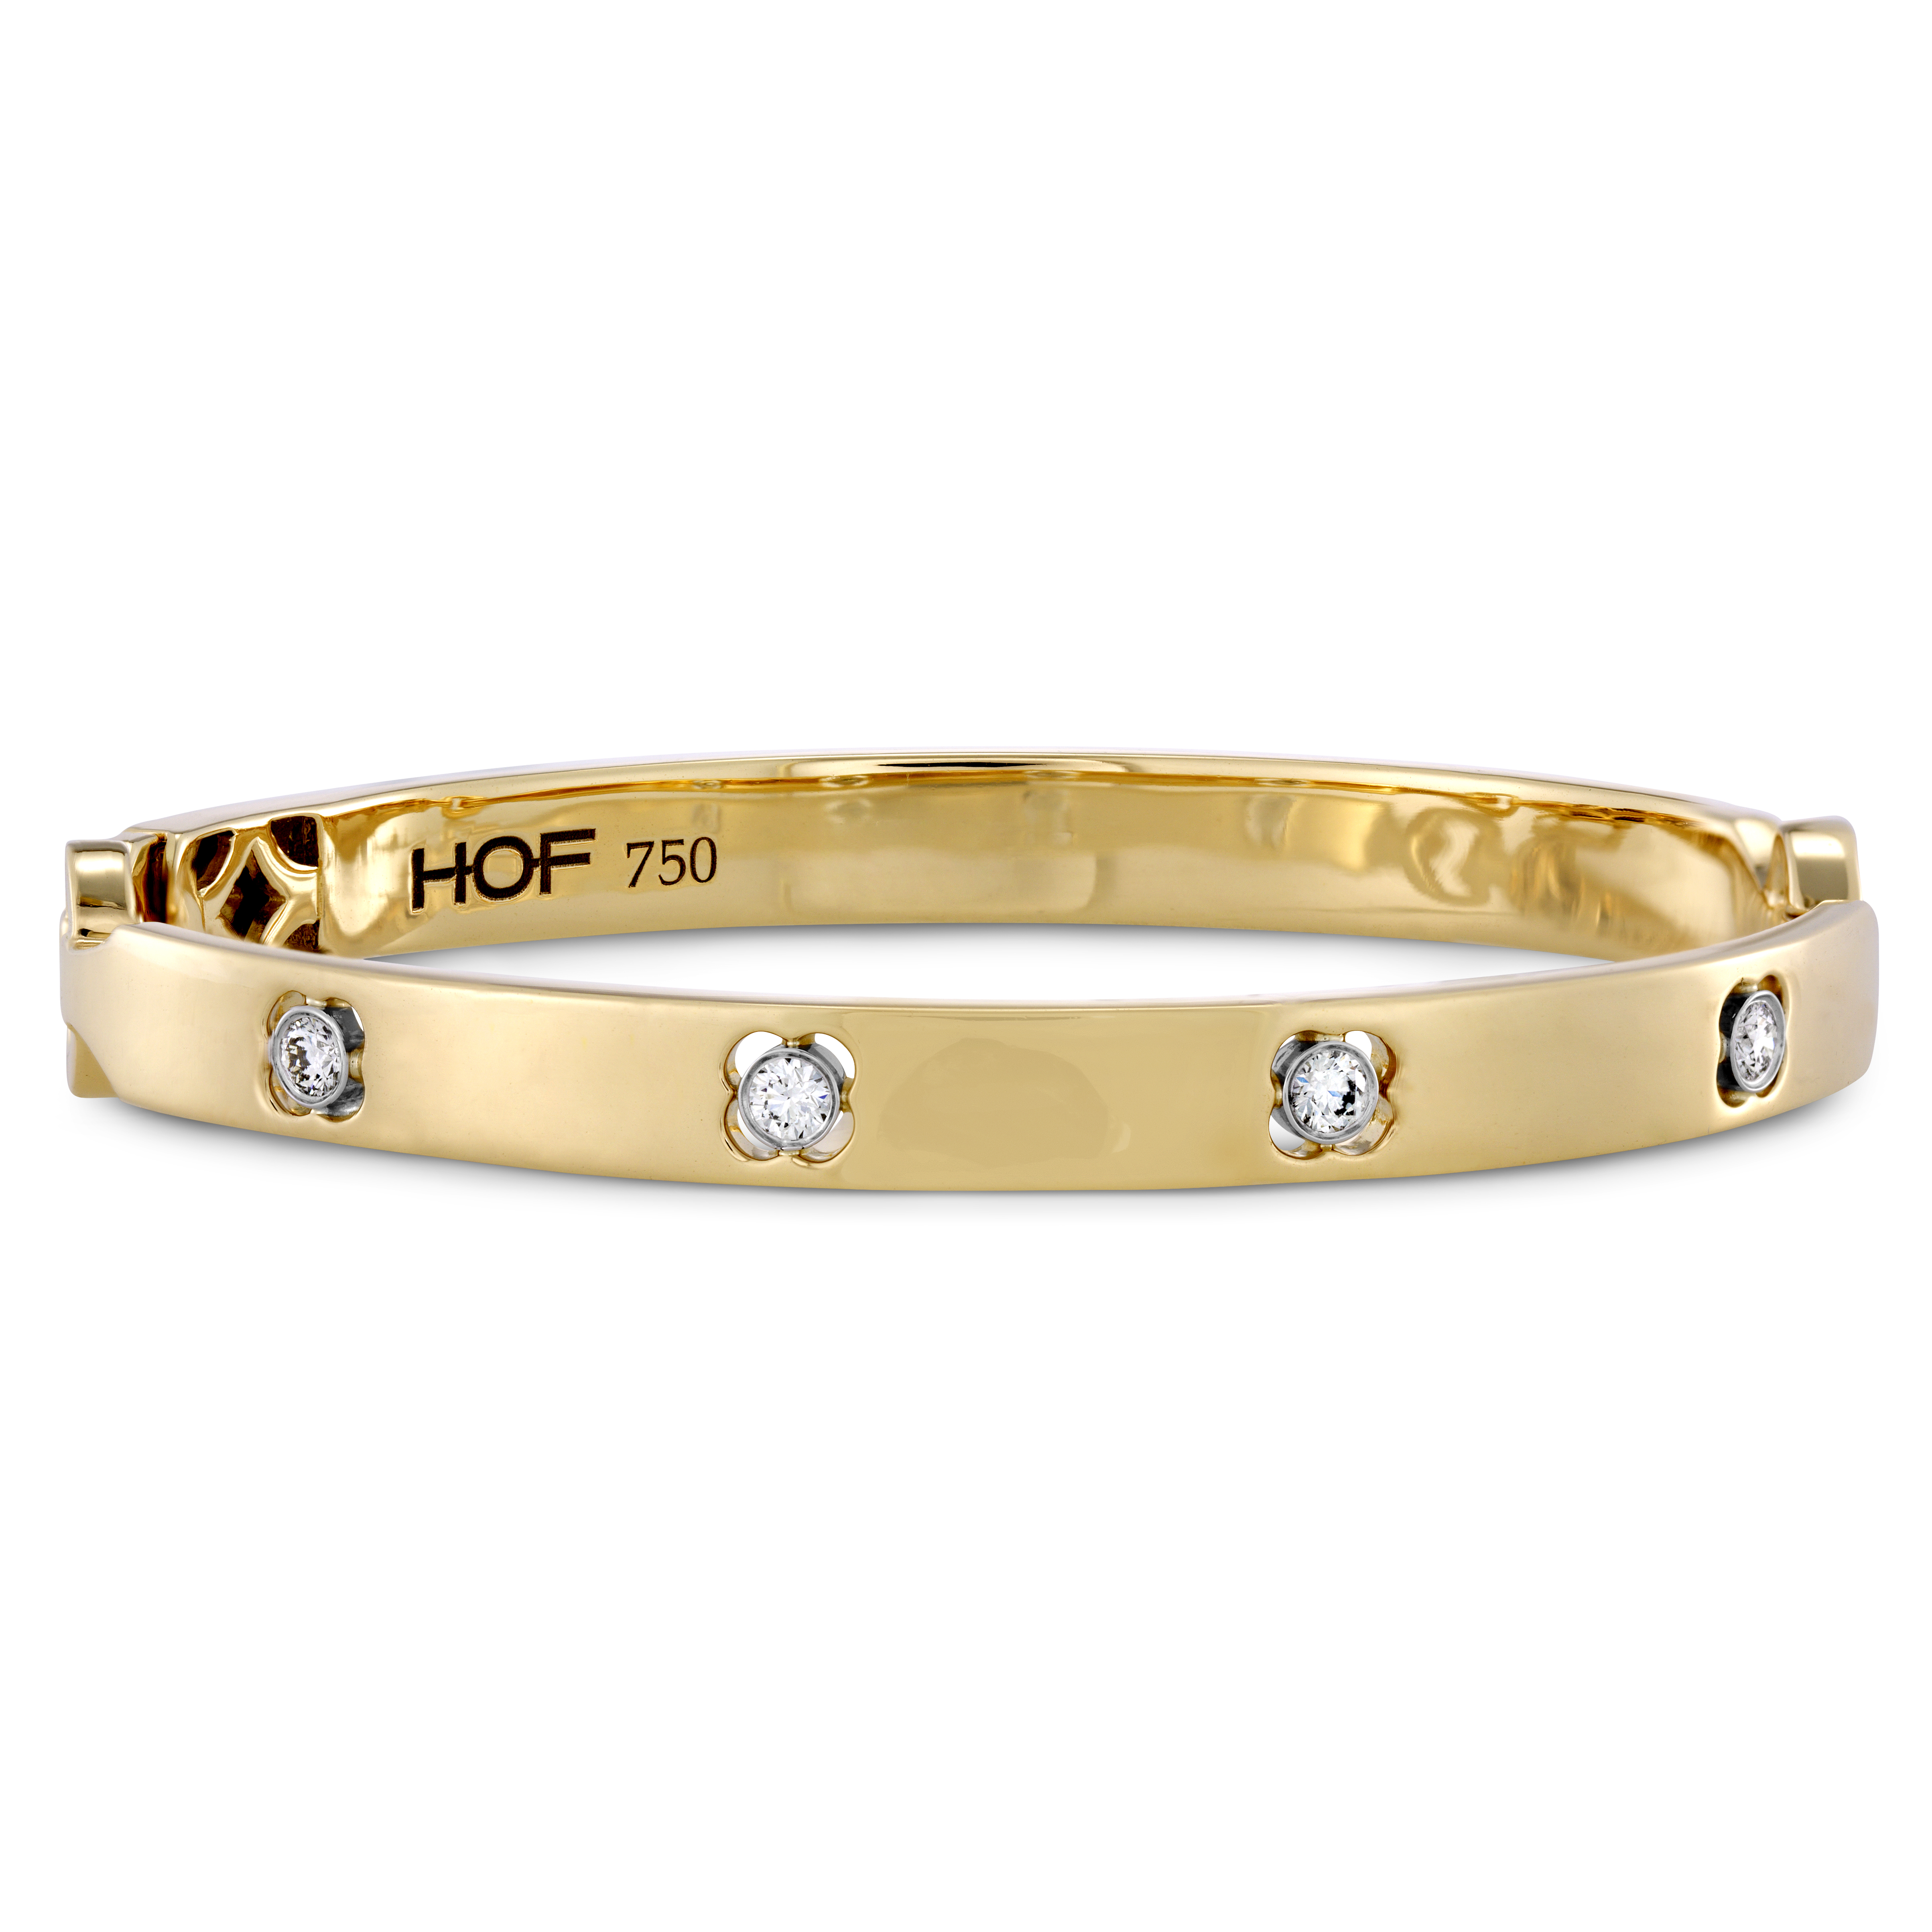 HEARTS ON FIRE Copley Bangle Yellow Gold